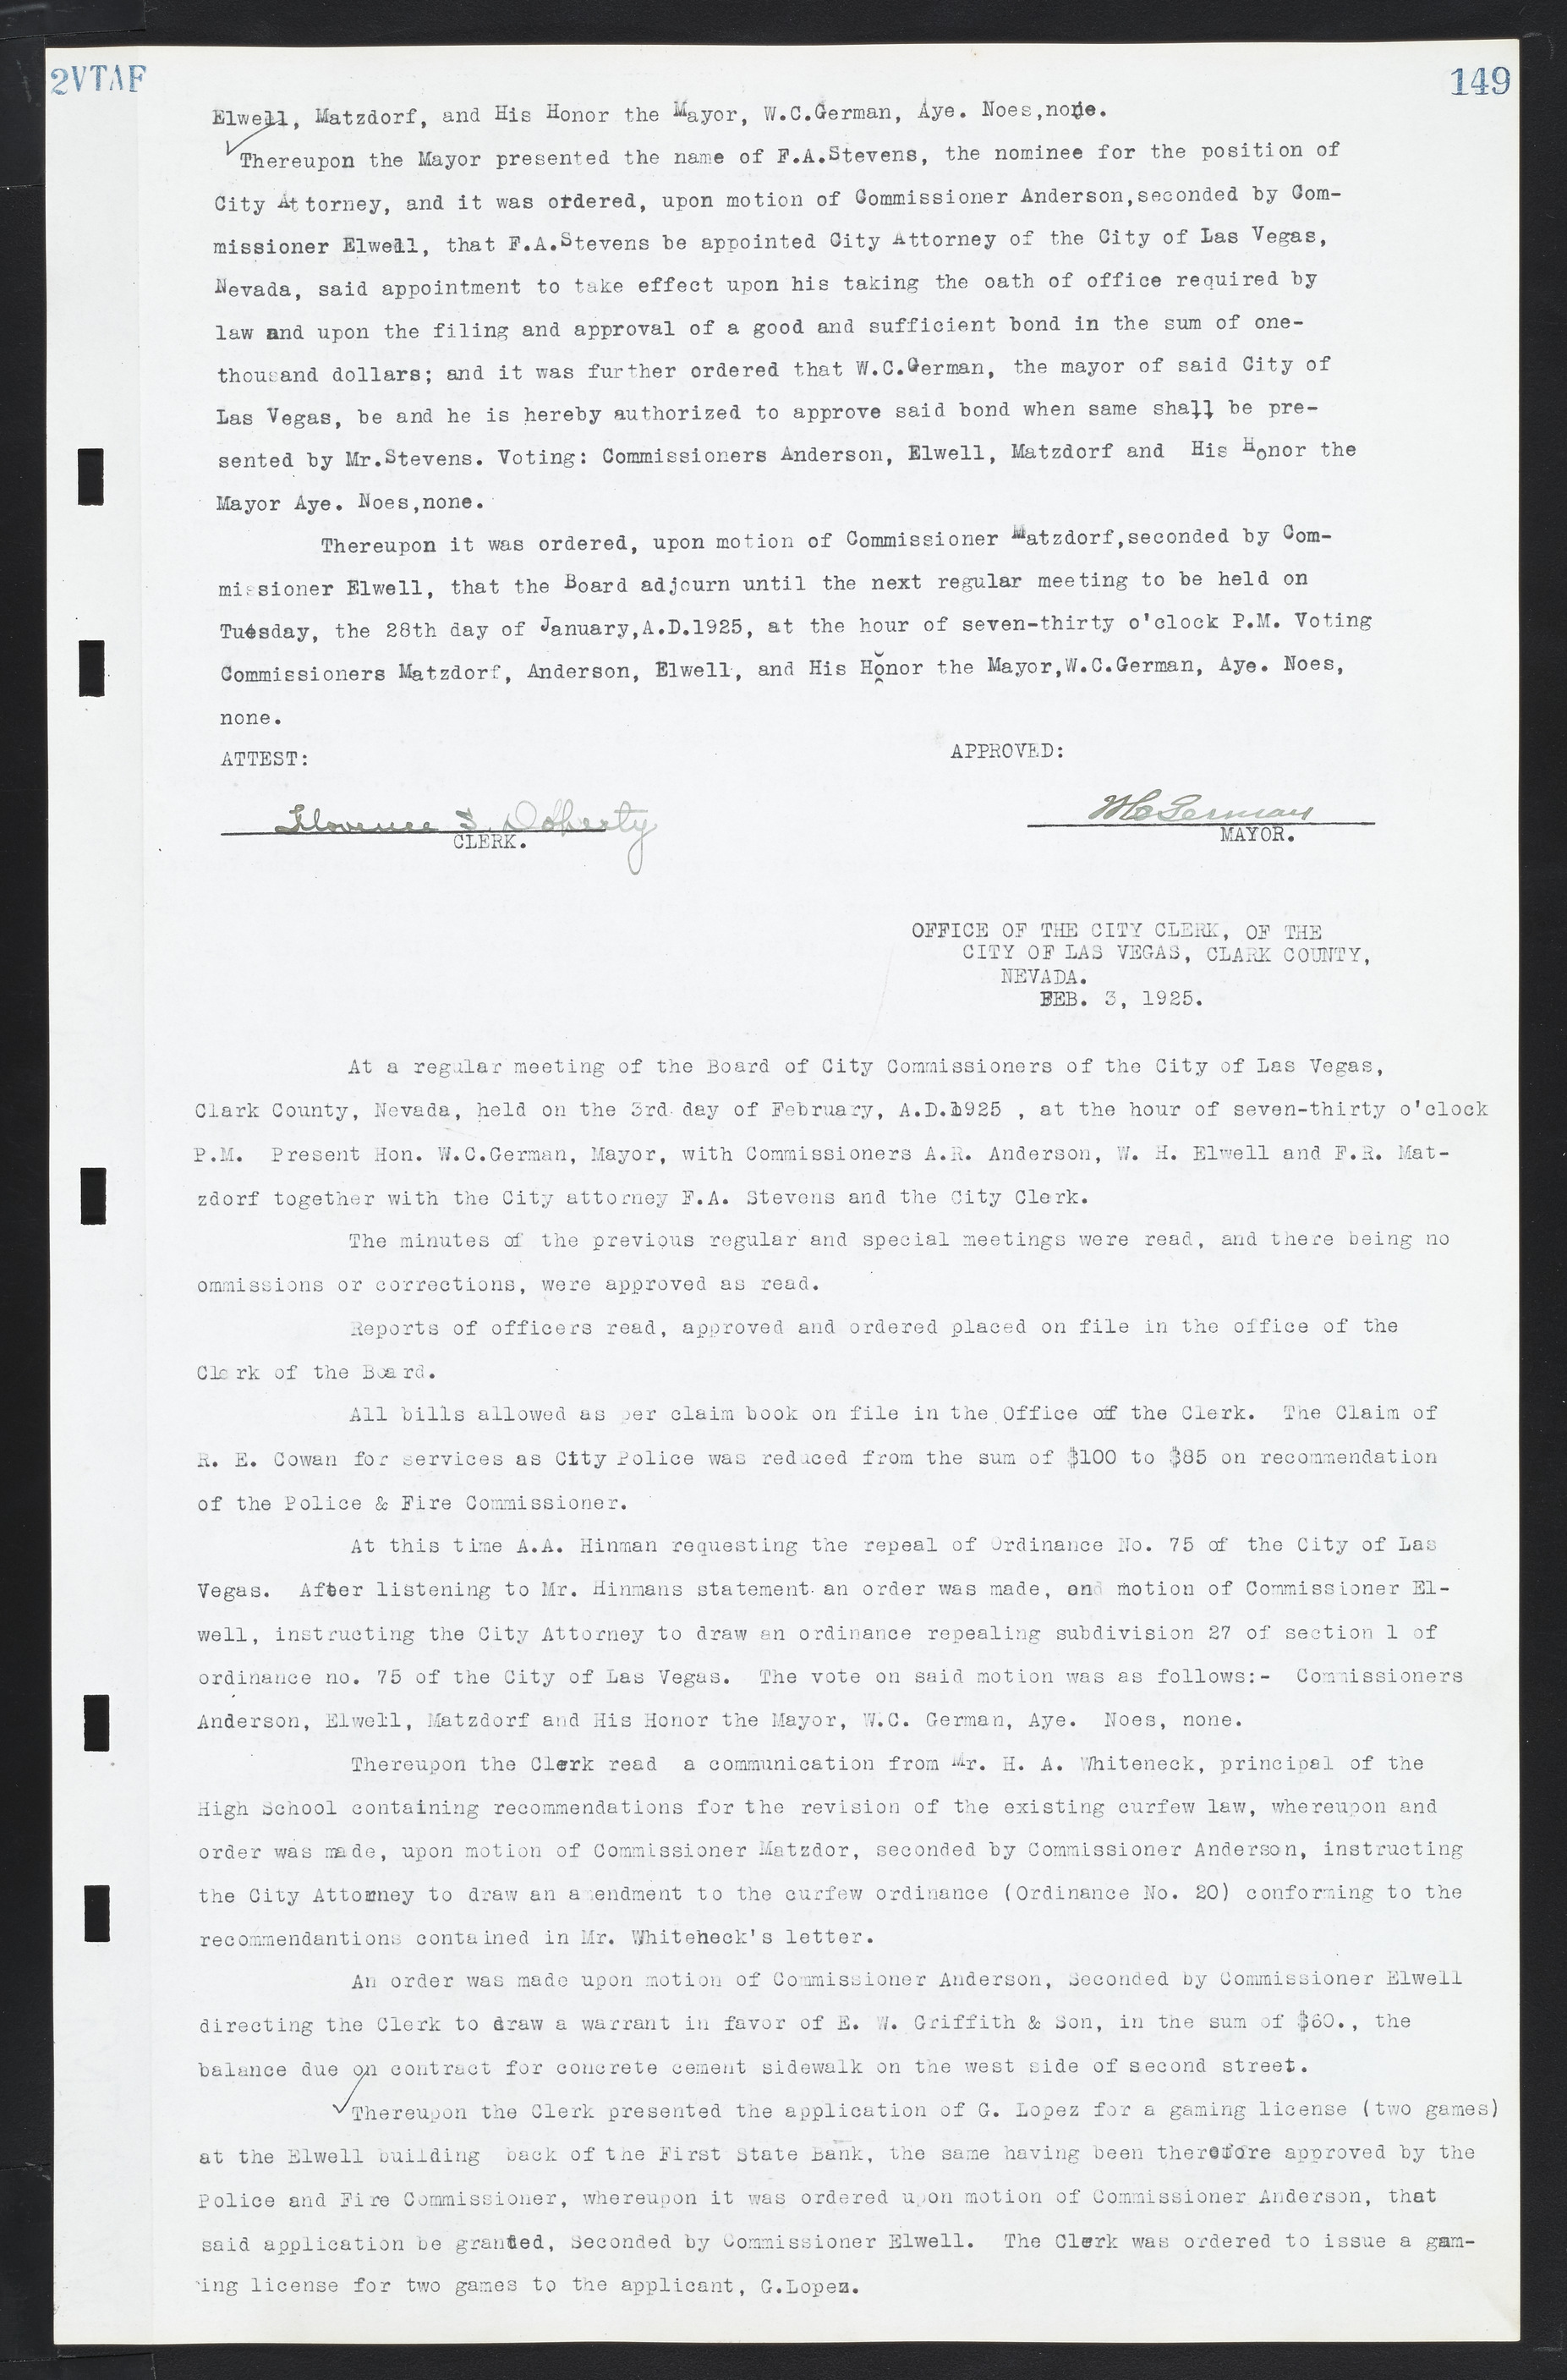 Las Vegas City Commission Minutes, March 1, 1922 to May 10, 1929, lvc000002-156